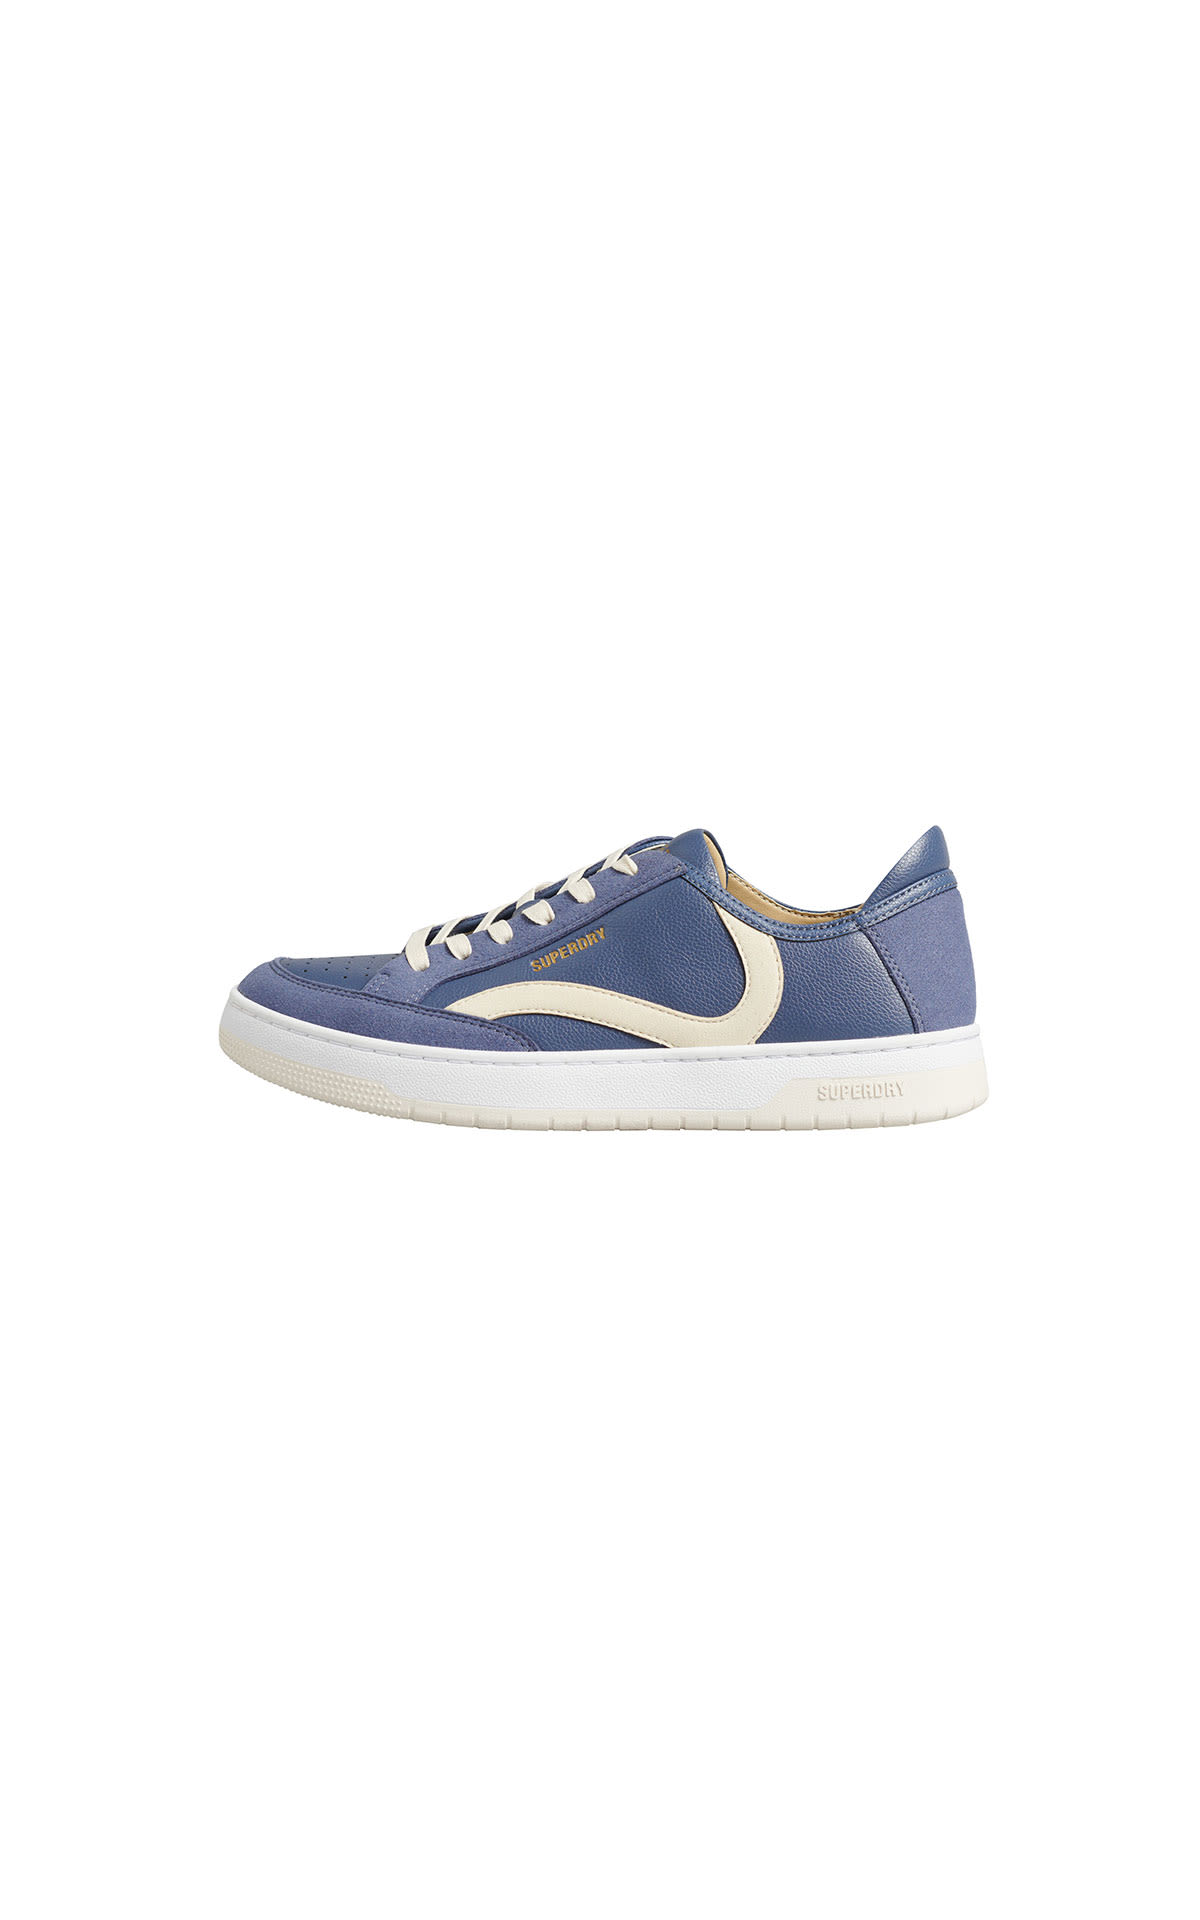 Superdry Soft navy trainers womens from Bicester Village